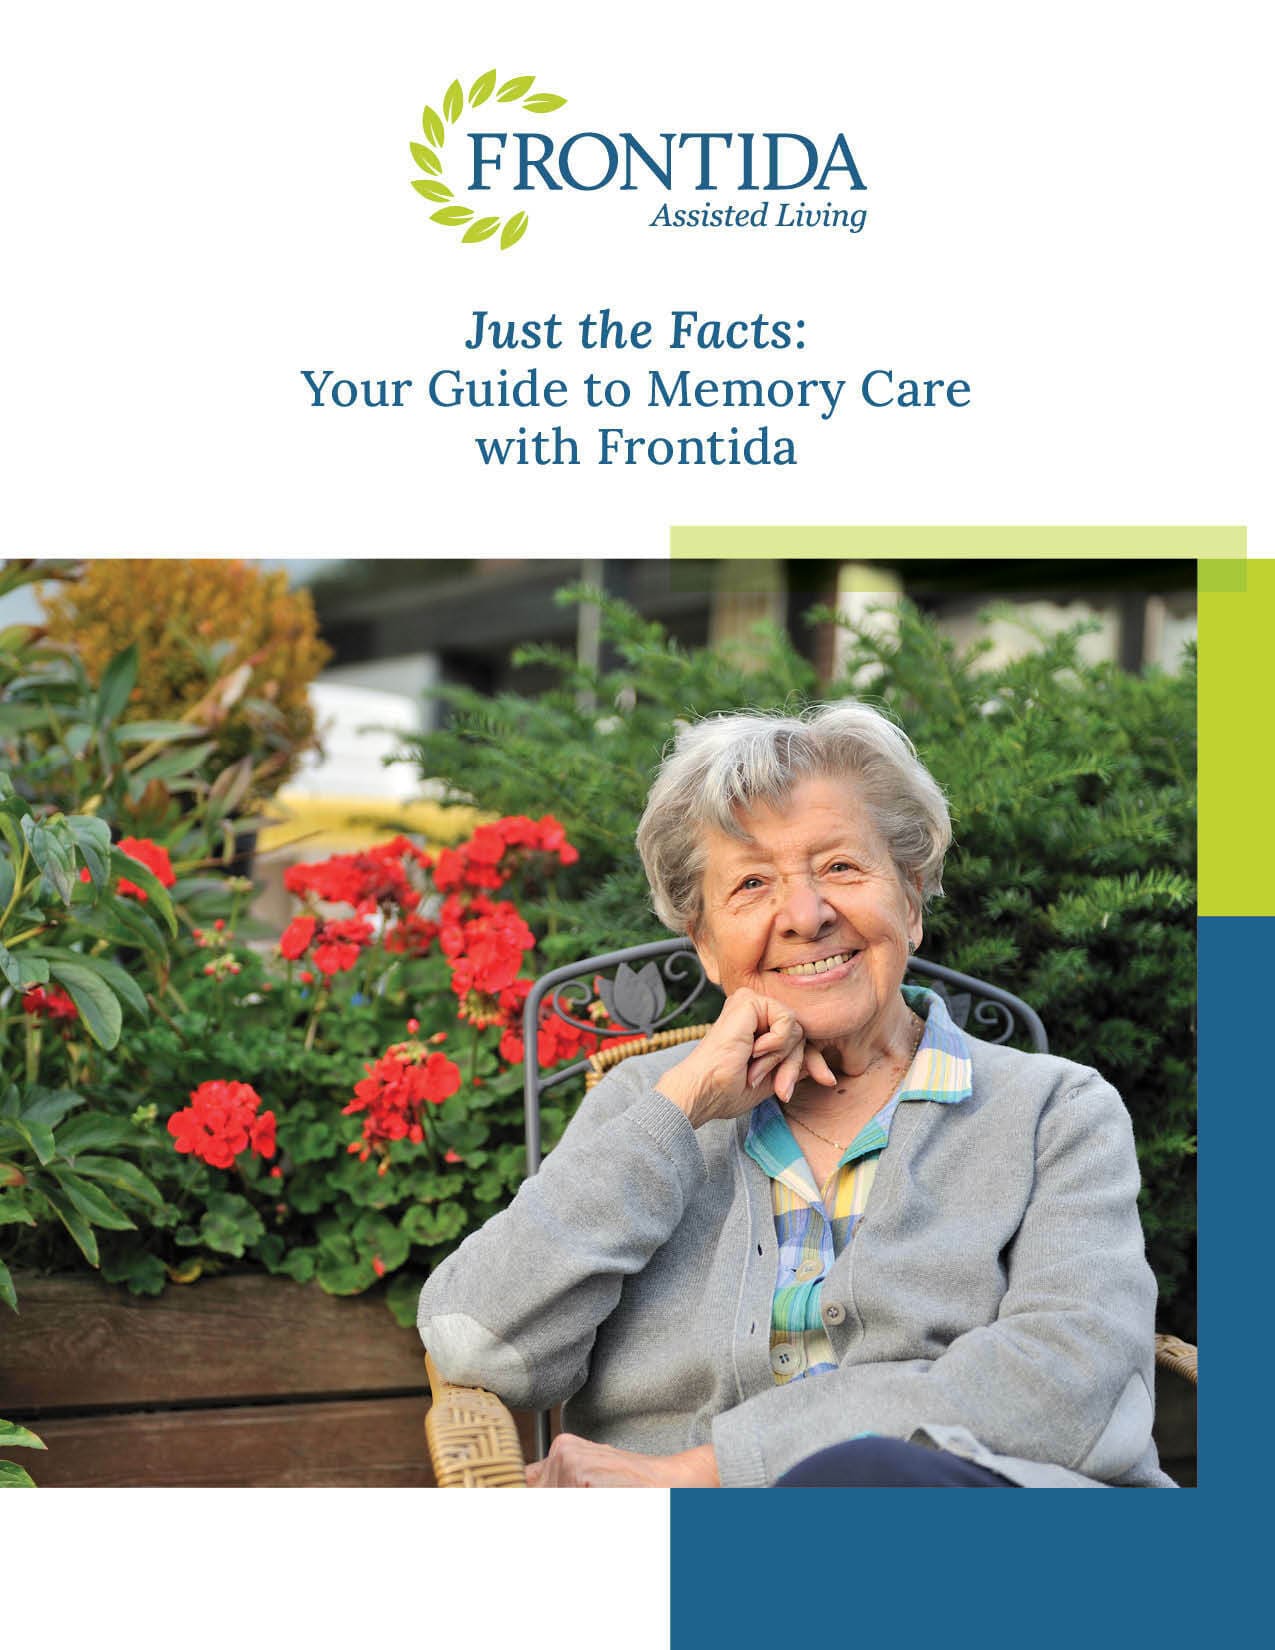 Cover Image for a guide